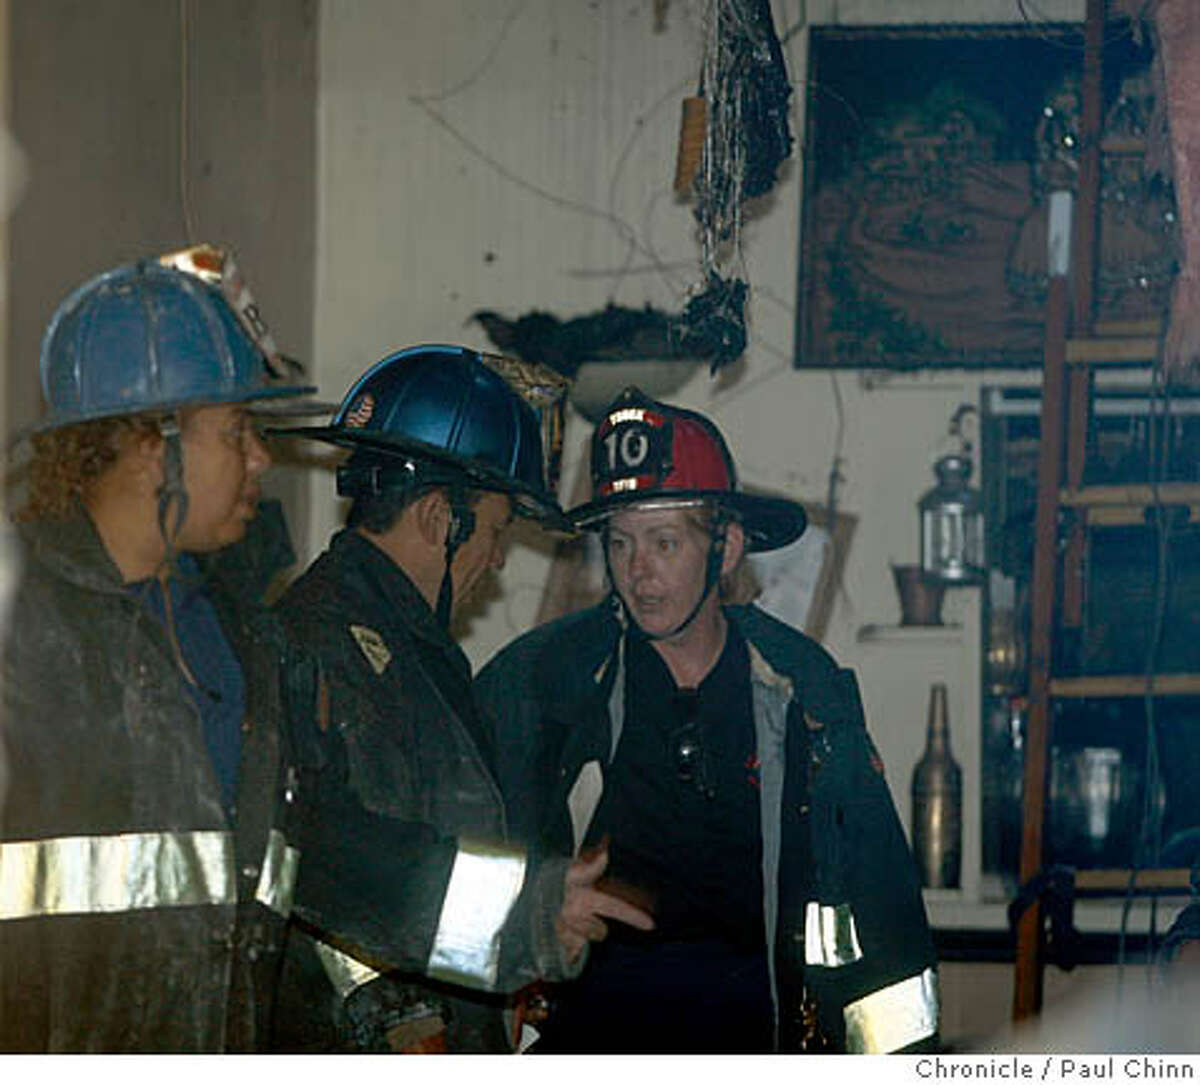 Fire offficials investigate inside the Star of India after two people died in an early morning fire at the restaurant on Polk Street in San Francisco, Calif. on Thursday, Nov. 29, 2007. According to fire department officials, the two people were found in a loft above the restaurant. PAUL CHINN/The Chronicle